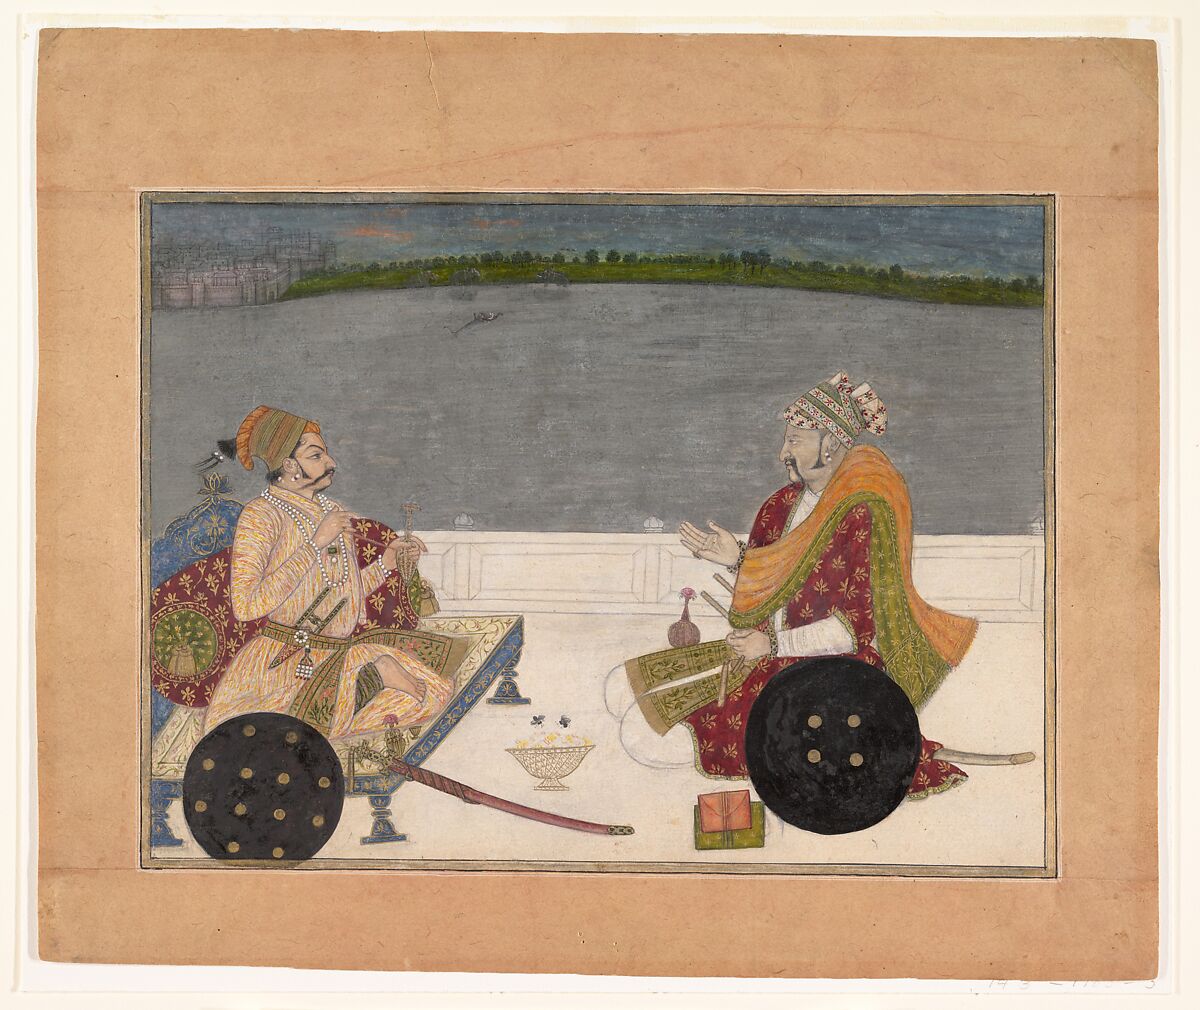 Prince Padam Singh of Bikaner with His Bard Gordhar on a Terrace at Night, Attributed to Bhavani Das, Ink, gold, silver and opaque watercolor on paper, India, Rajasthan, Kishangarh 